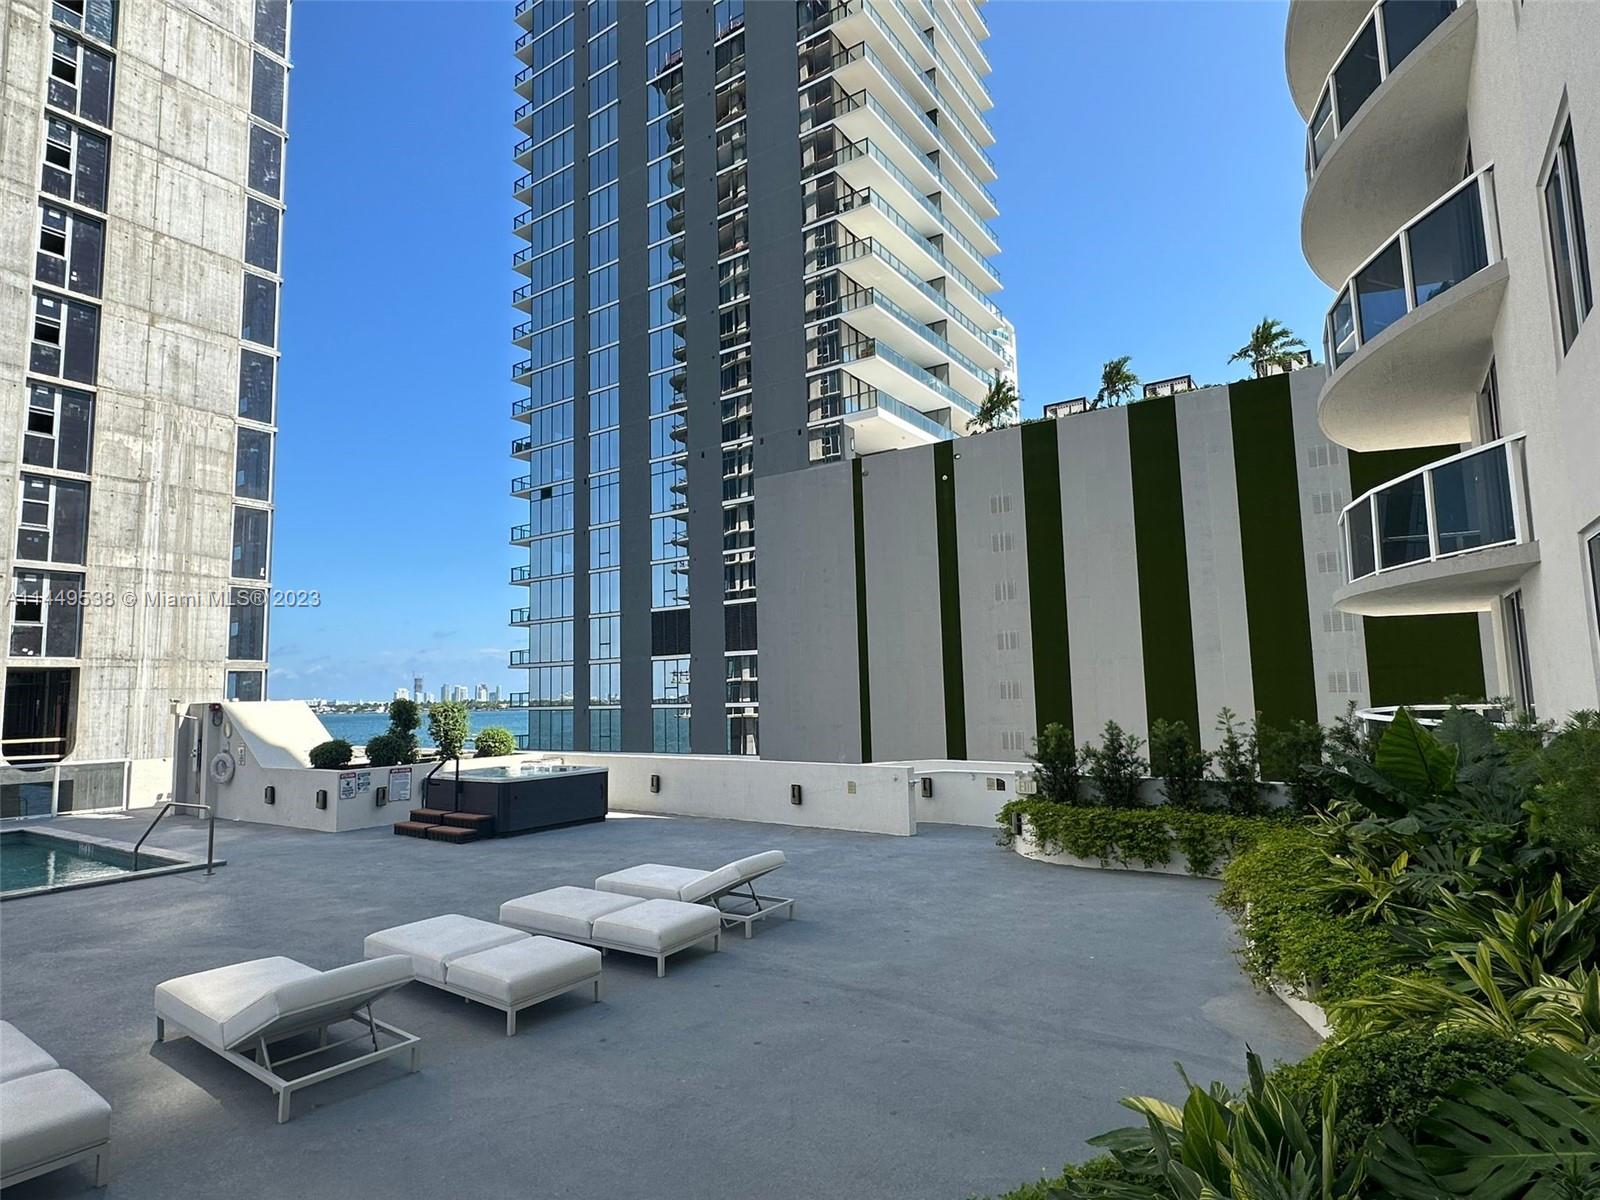 RECENTLY REMODELED. New floors. Corner Unit 3-Bedroom unit with 1 ASSIGNED PARKING spaces located in the HEART of Miami's EDGEWATER! Location, Location, Location! Close to Wynwood, Midtown, Design District, Brickell & The Beaches! Unit has a spacious layout w/ open kitchen, 2 full bathrooms & nice balcony with nice views and wood floors. Beautiful newer boutique building with pool overlooking bay, gym, recreation room & more!